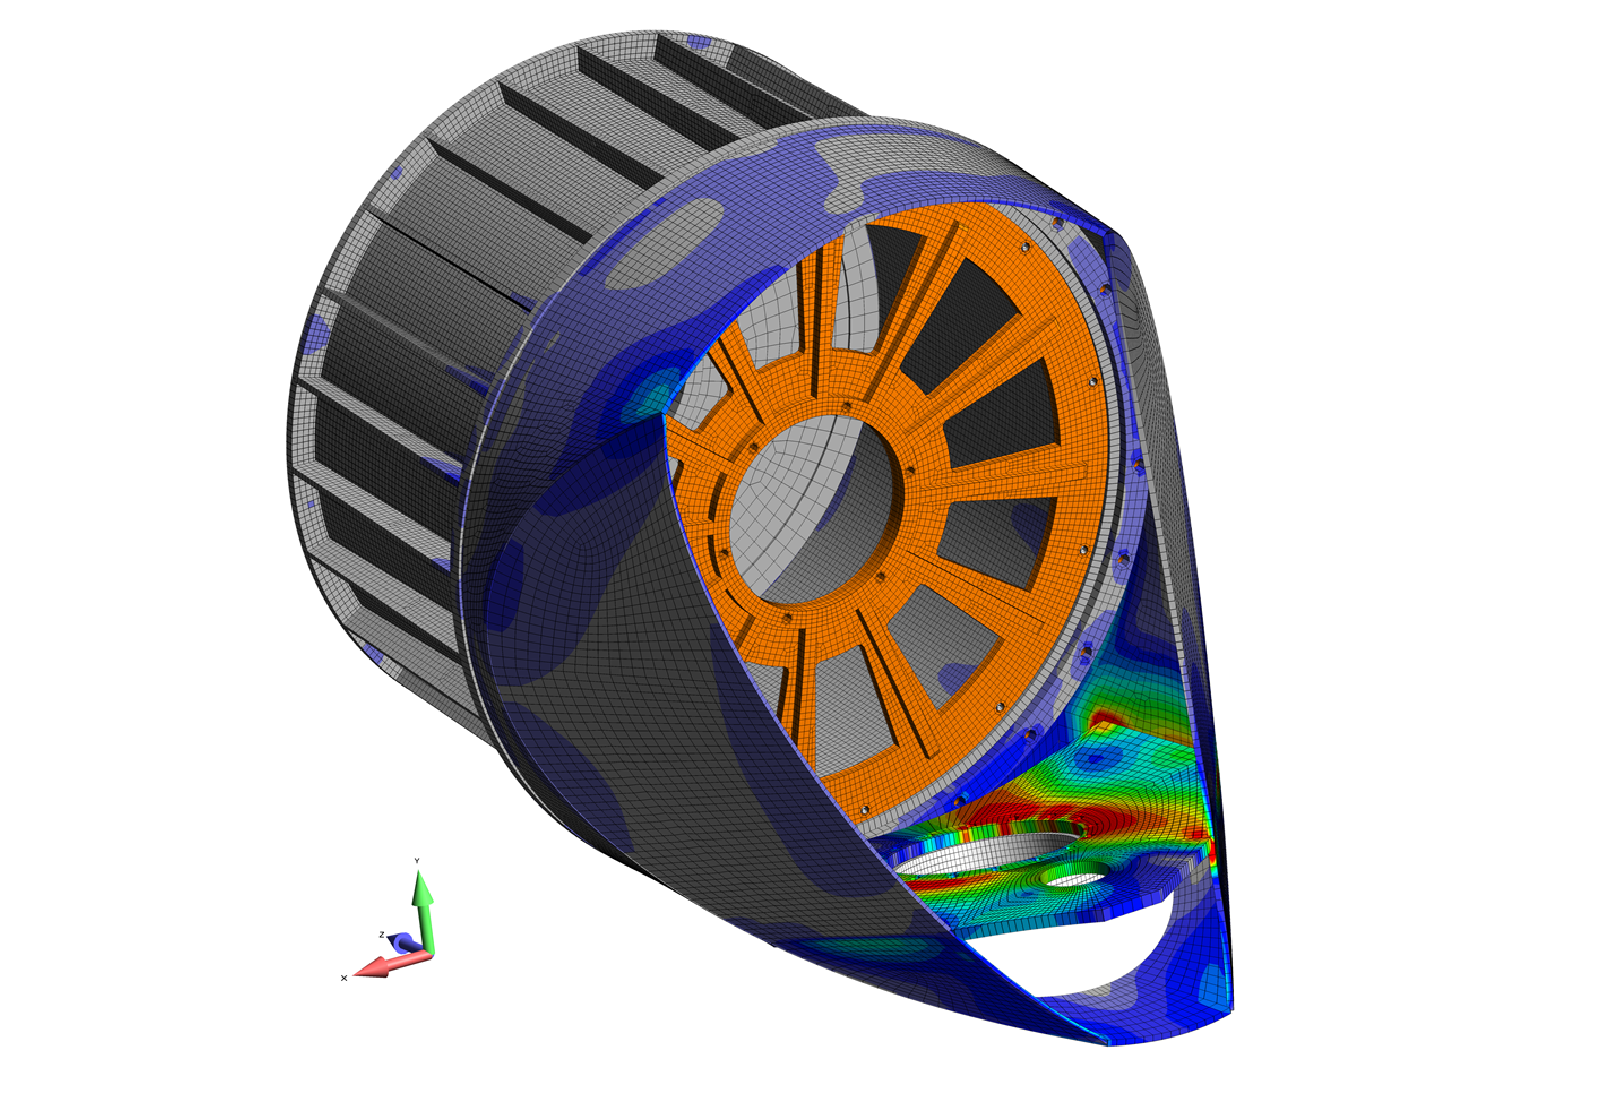 Stress analysis of 50 kW wind turbine nacelle given tower and blade hub loading FEA Fatigue Consultants